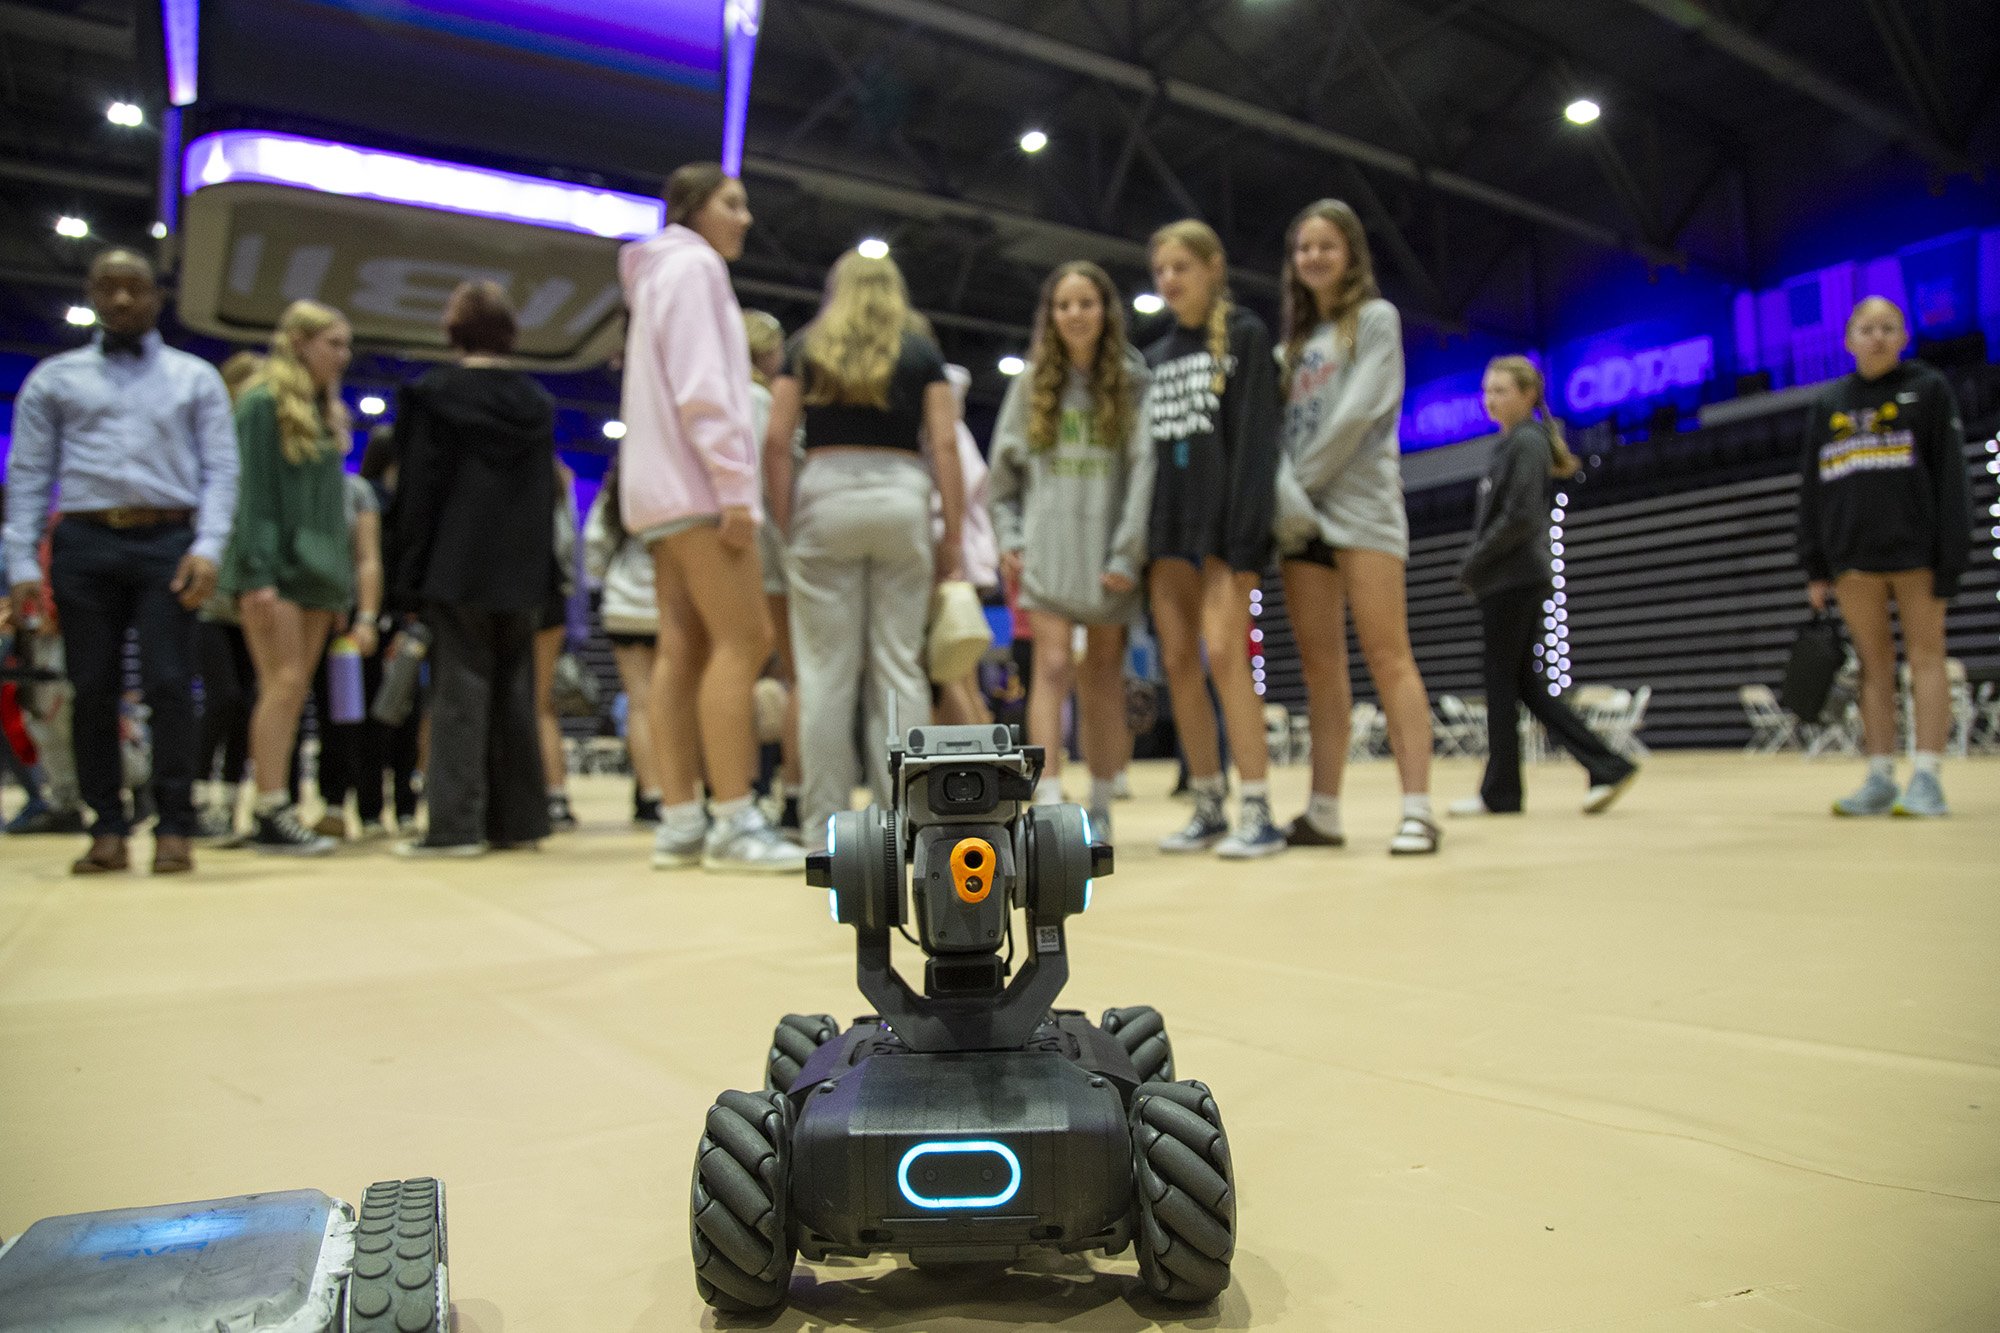 A robot moves towards a group of girls in the background at Showcase Day at Broadview Center.